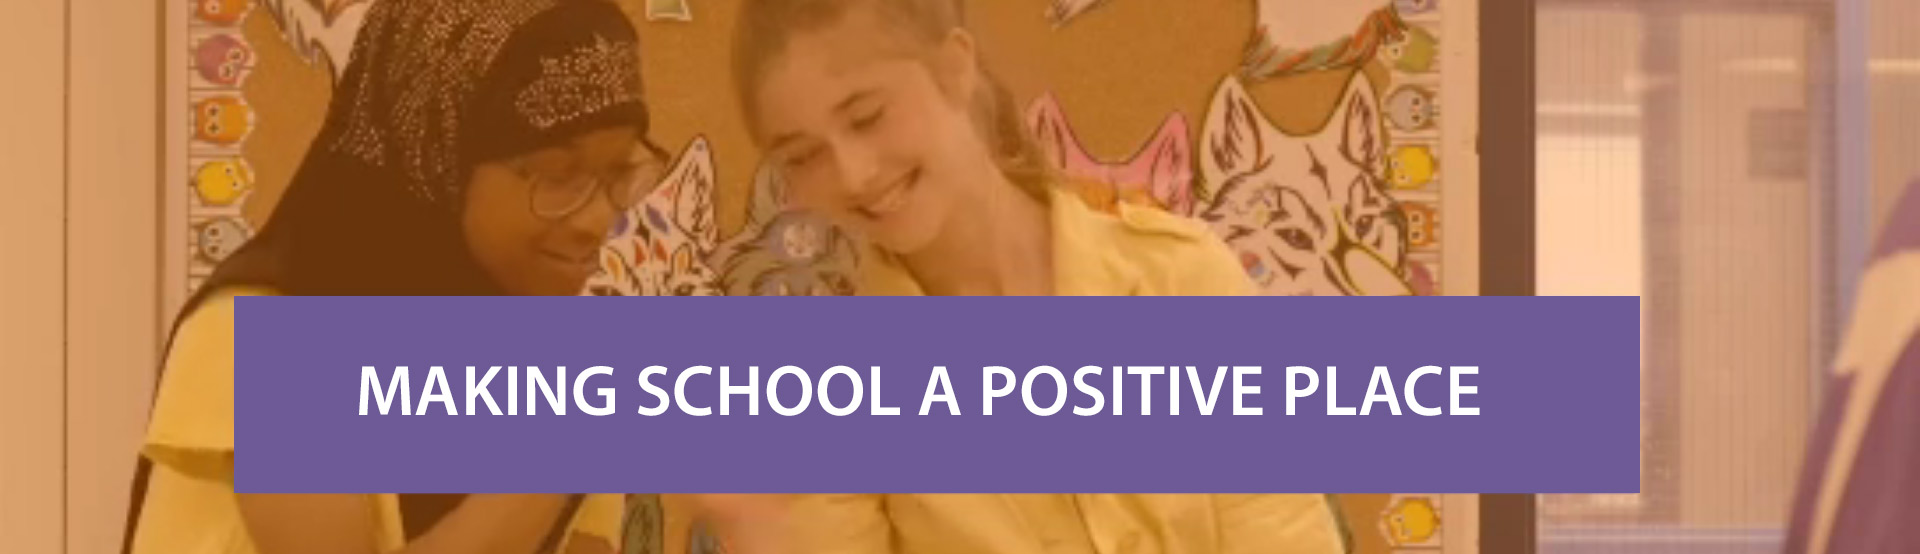 Making School a Positive Place